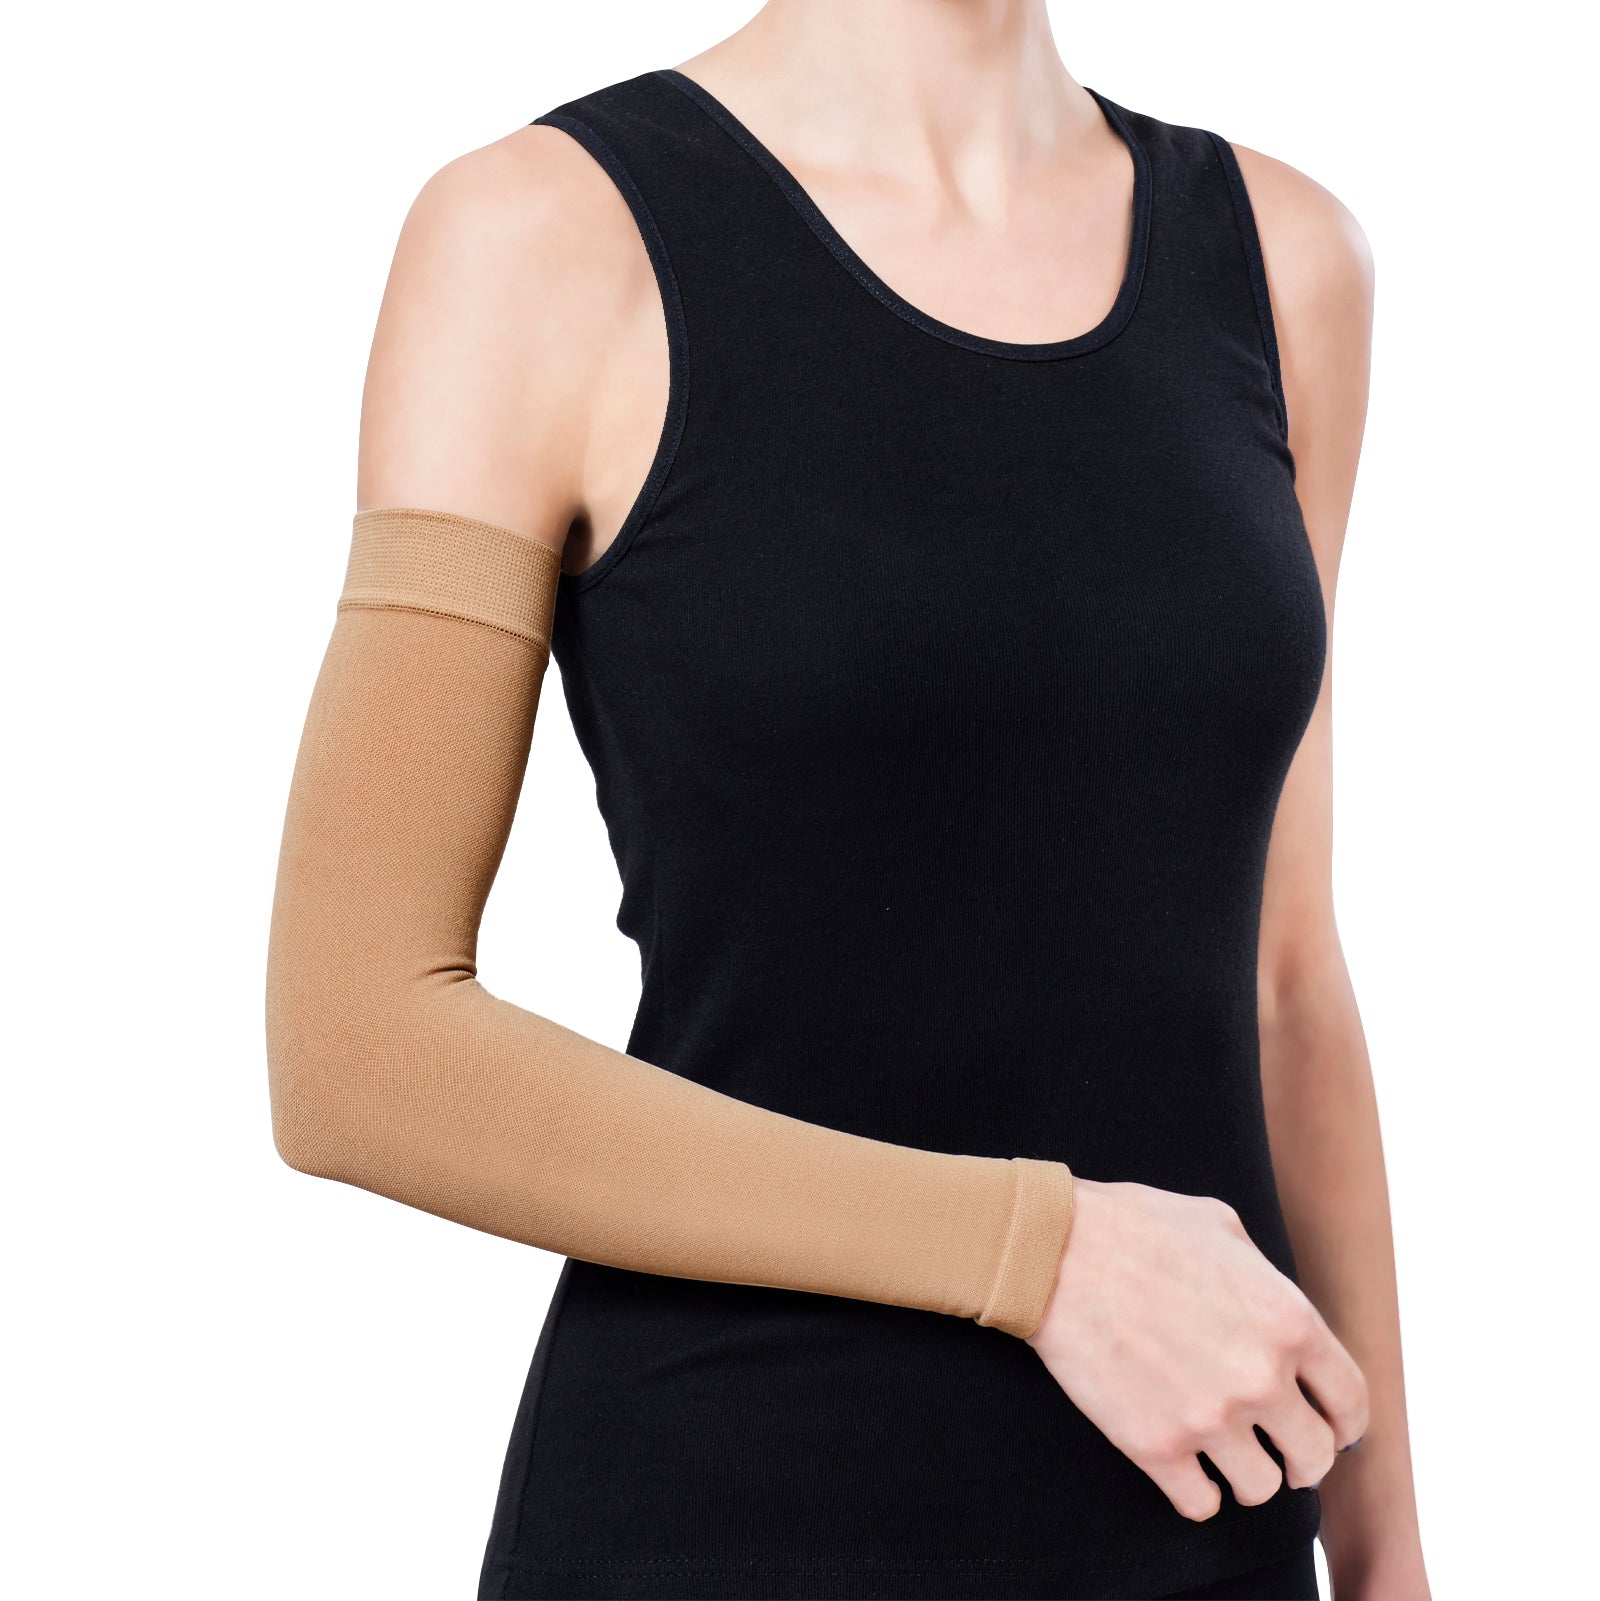 Lymphedema Arm Sleeve for Arm Left Hand Arm, Compression Sleeve Size XXL 